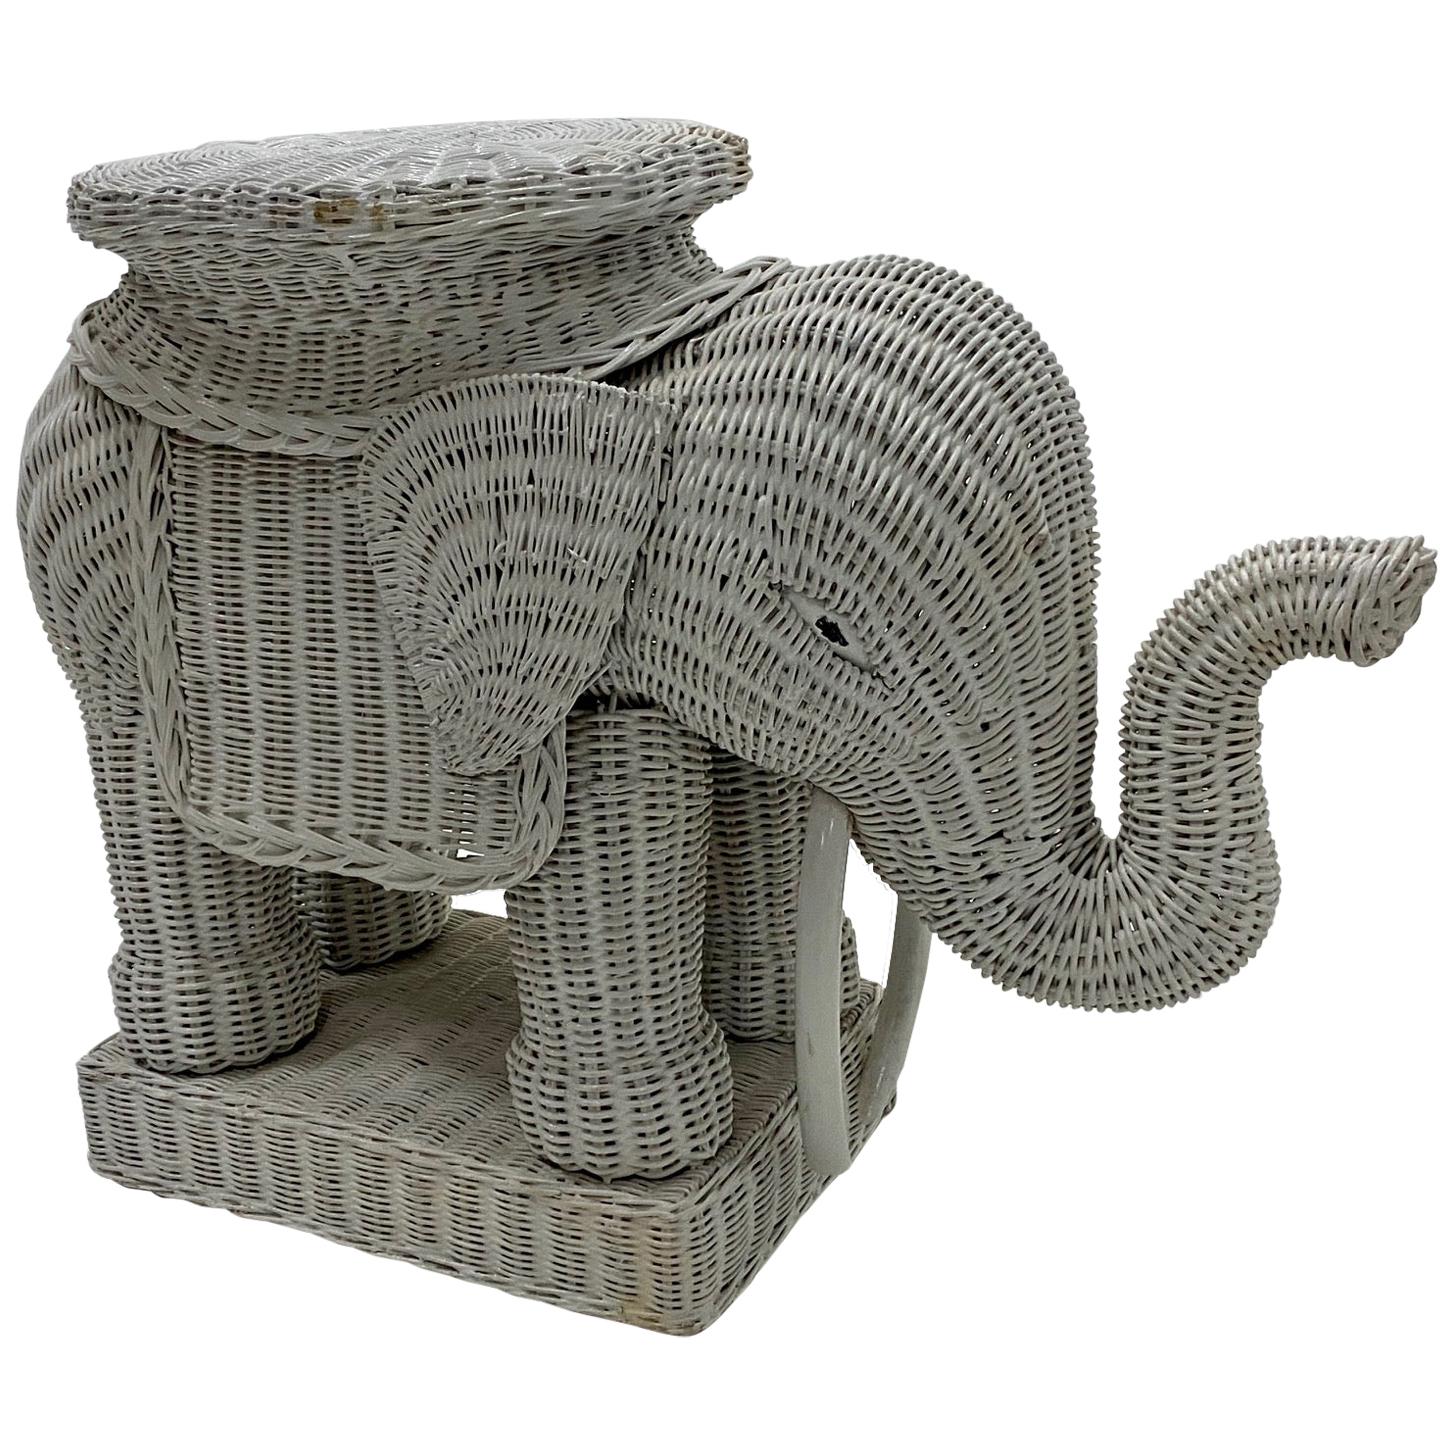 Fun Vintage Wicker and Rattan Elephant End Table